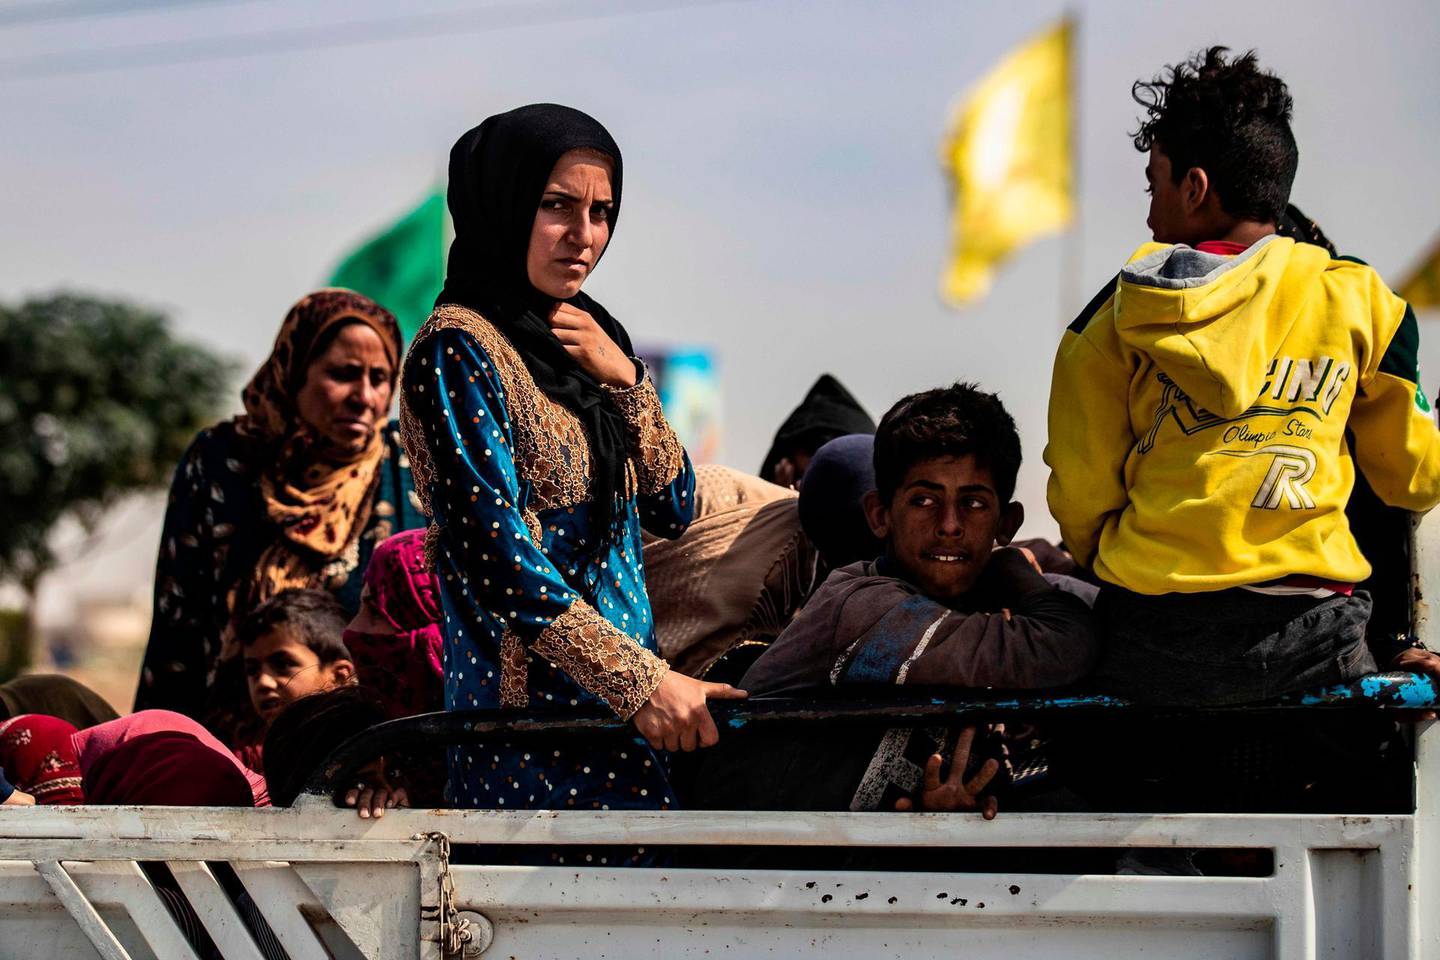 CORRECTION / TOPSHOT - Displaced Syrians sit in the back of a pick up truck as Arab and Kurdish civilians flee amid Turkey's military assault on Kurdish-controlled areas in northeastern Syria, on October 11, 2019 in the town of Tal Tamr in the countryside of Syria's northeastern Hasakeh province. Turkey pressed its deadly offensive against Kurdish targets in Syria as it battled to seize key border towns on the third day of an operation that has forced 100,000 civilians to flee. / AFP / Delil SOULEIMAN
